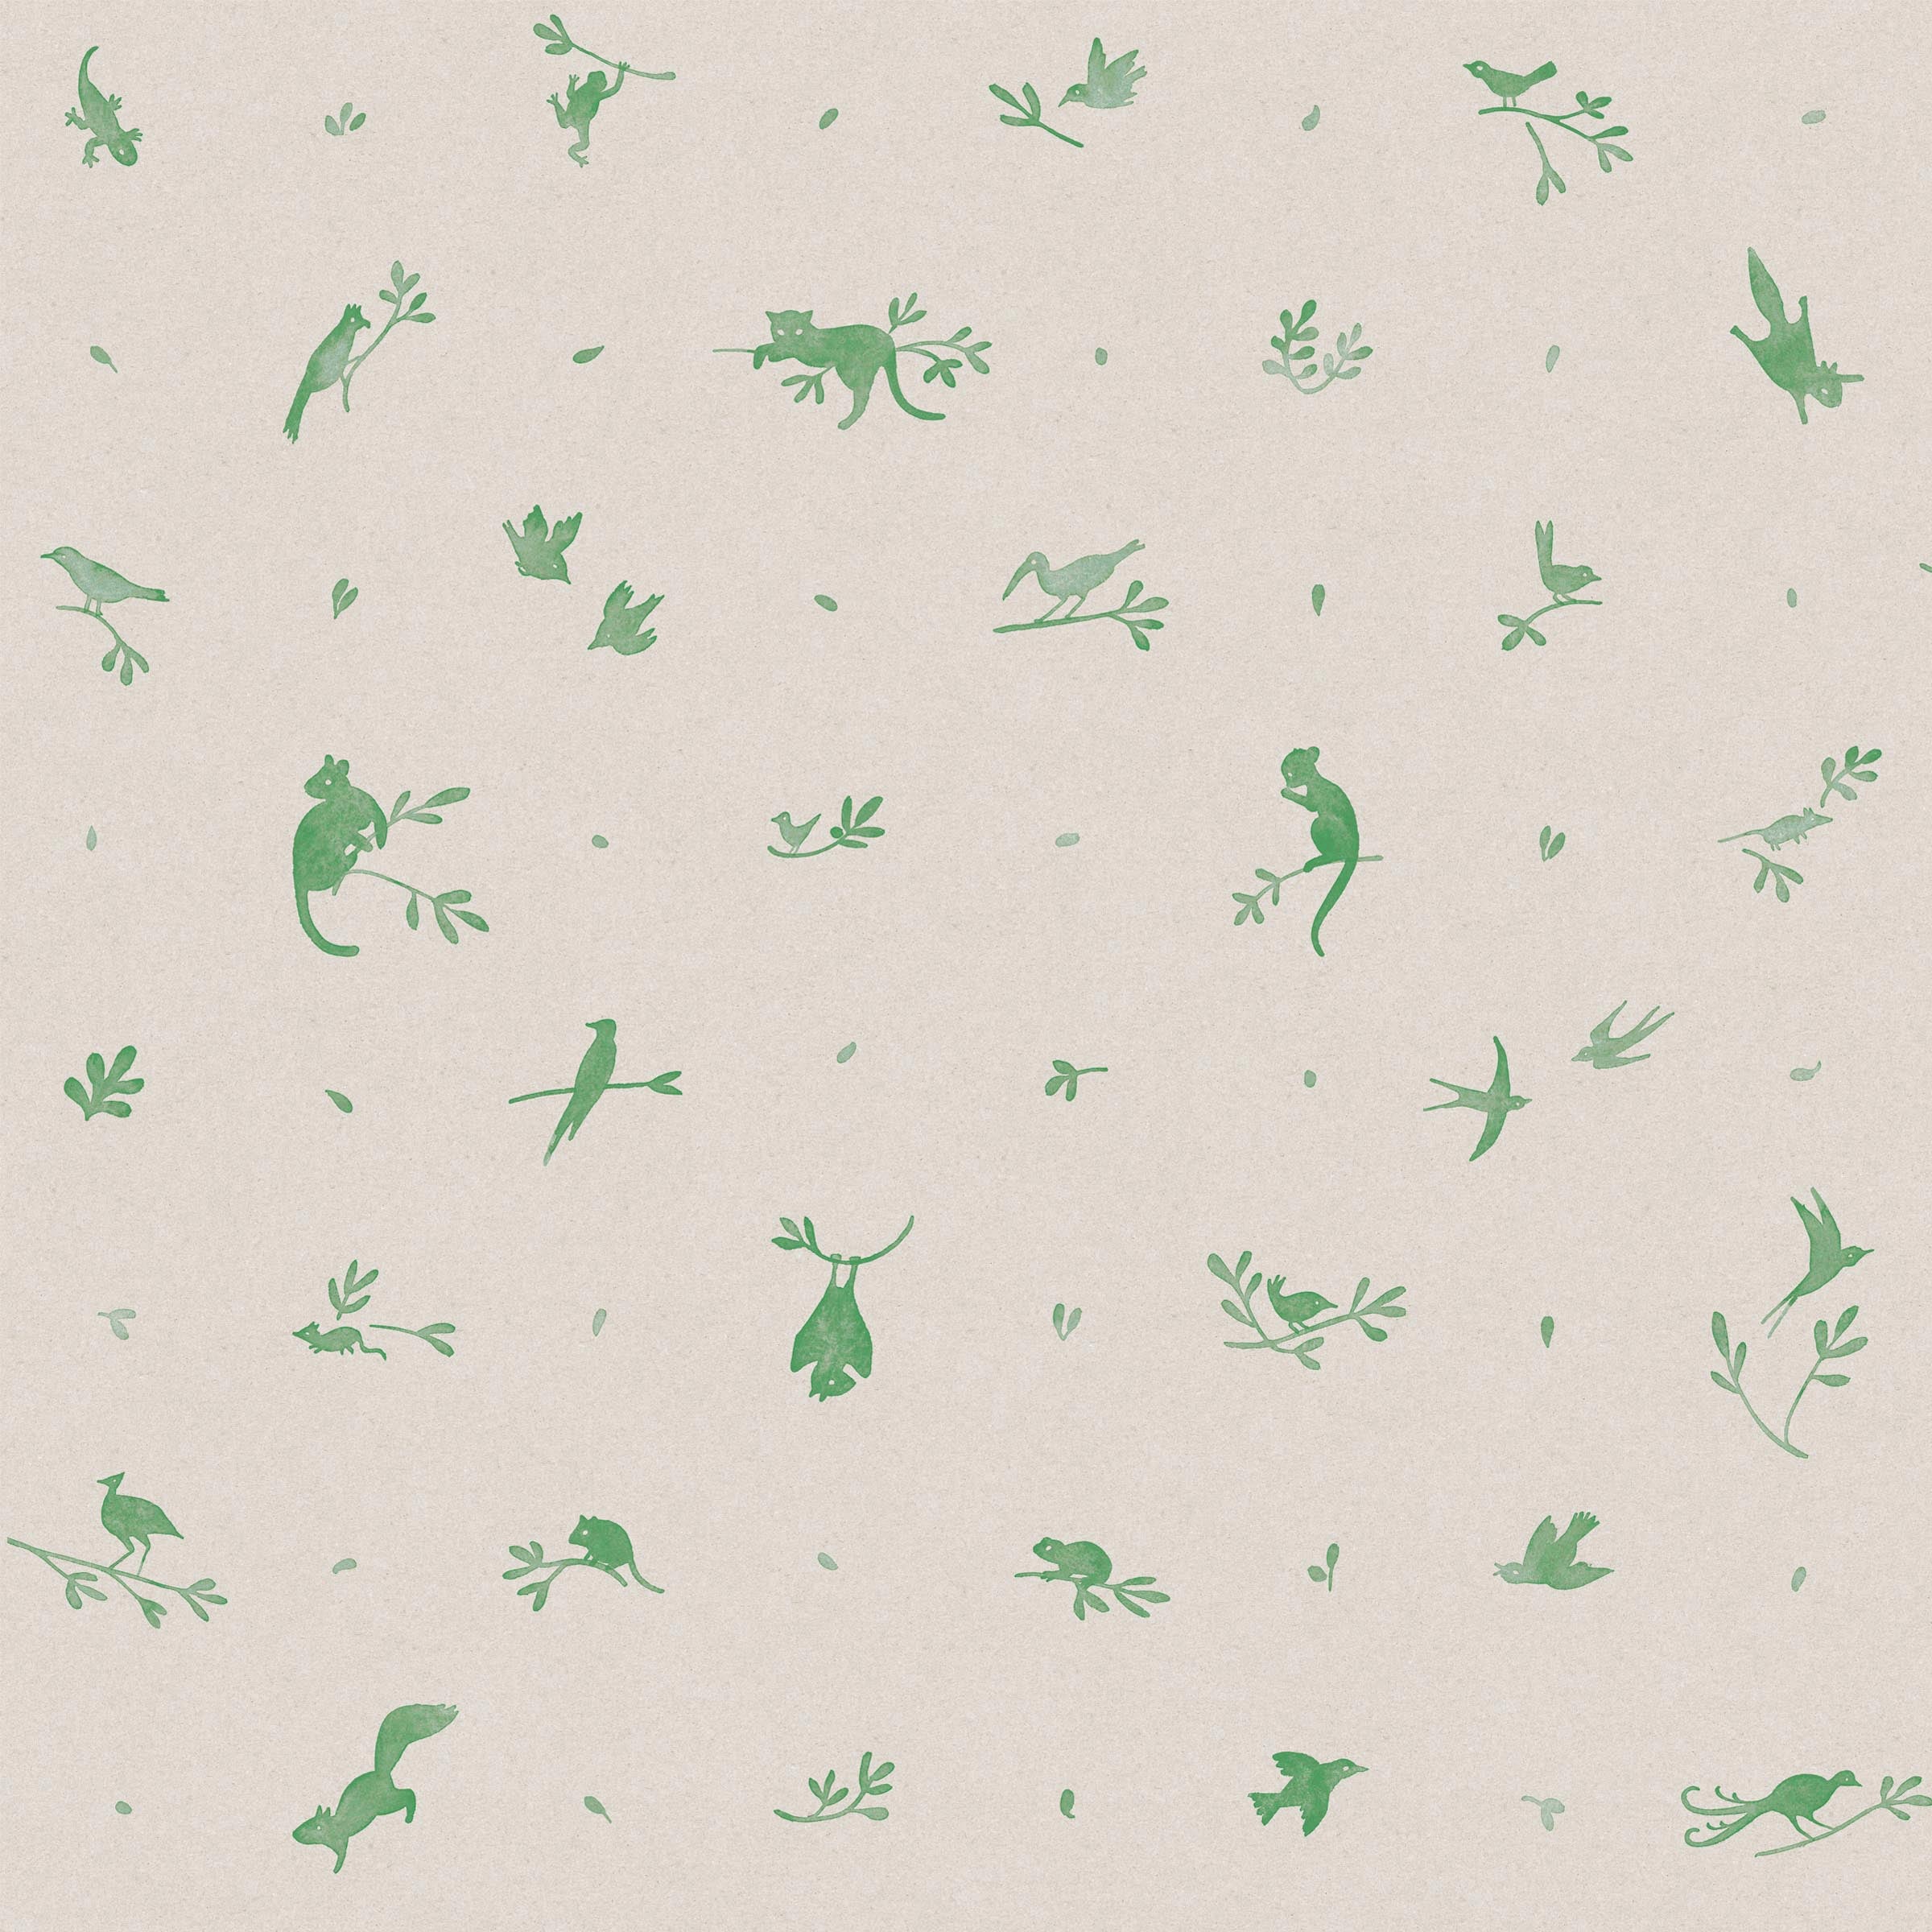 Detail of fabric in a playful animal and branch print in green on a tan field.